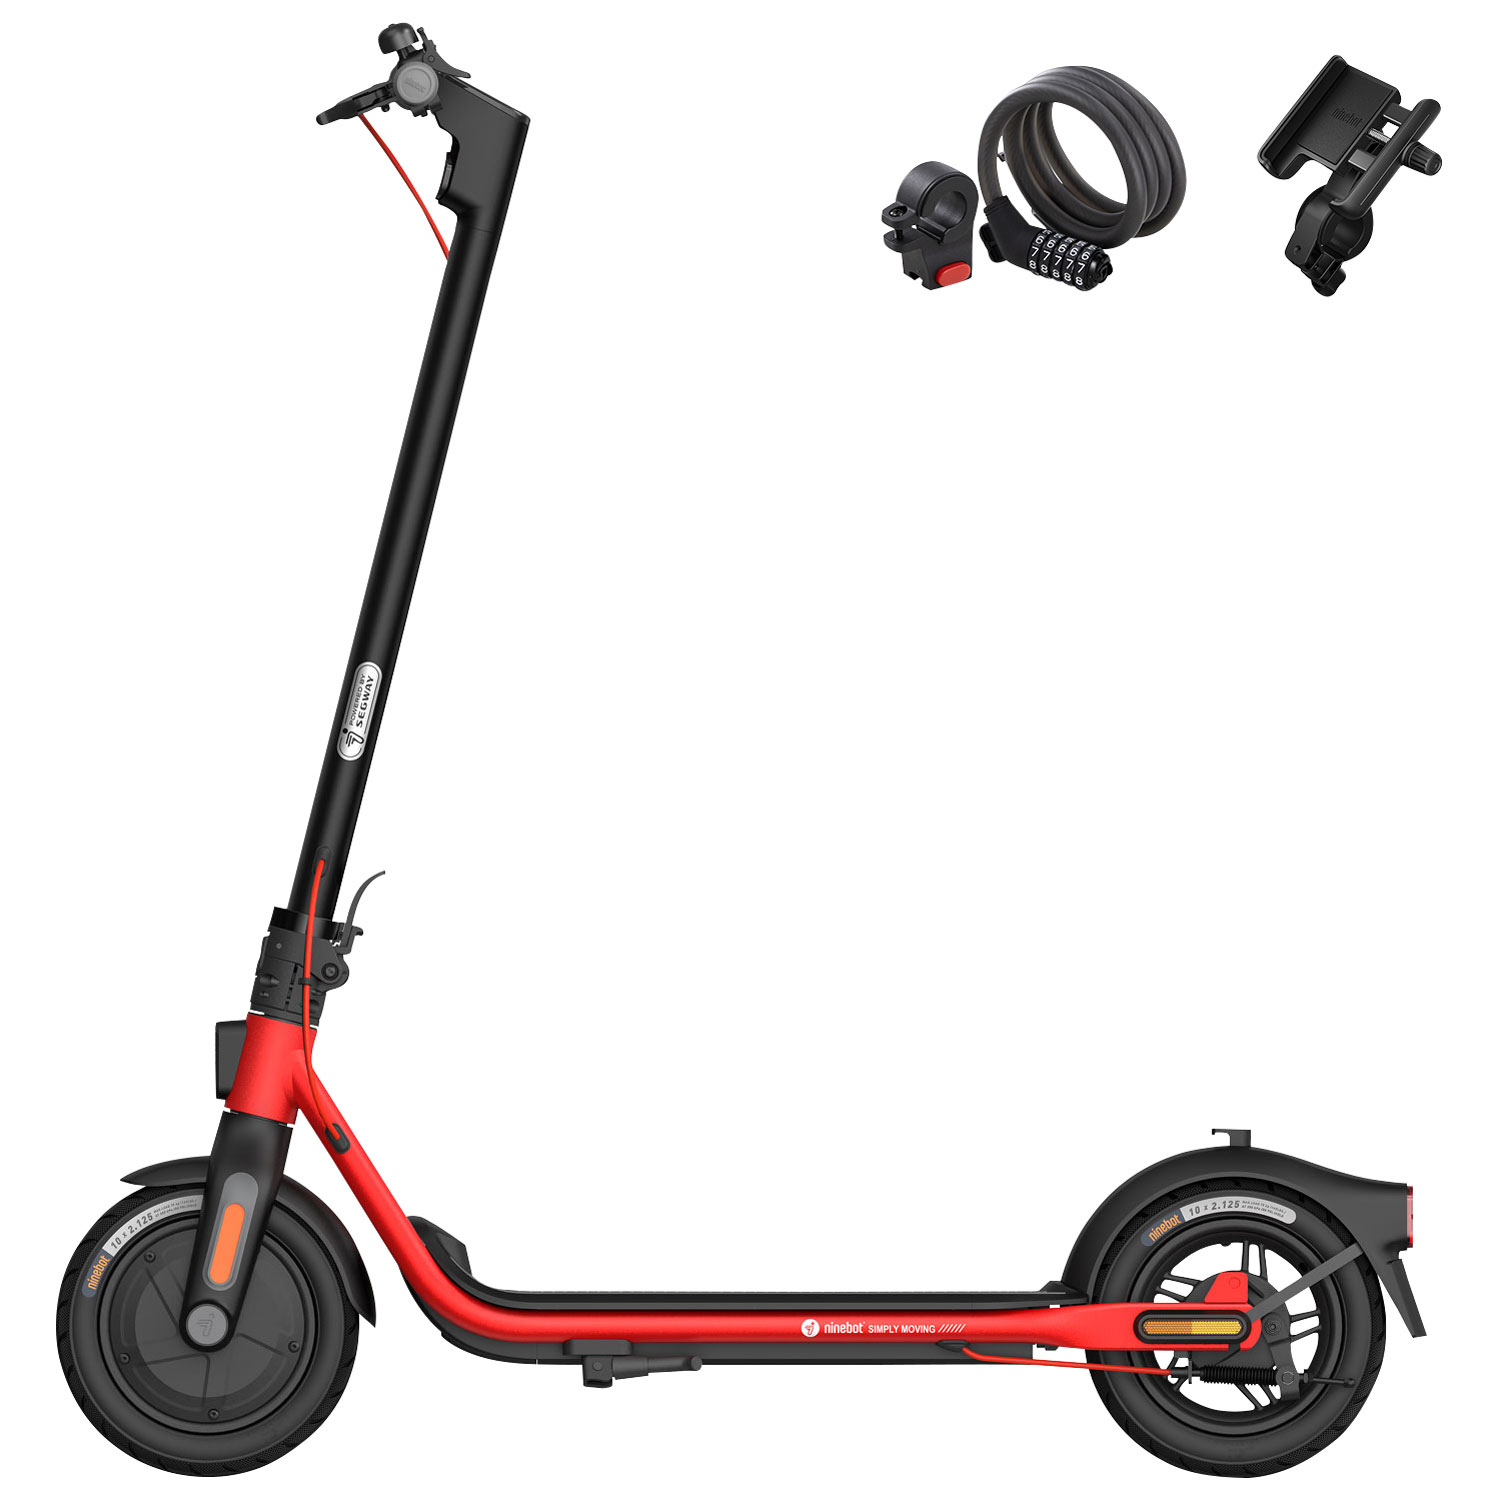 Segway Ninebot D38U Adult Electric Scooter with Segway Lock & Phone Holder (350W Motor/ 38km Range / 30km/h Top Speed) - Black/Red